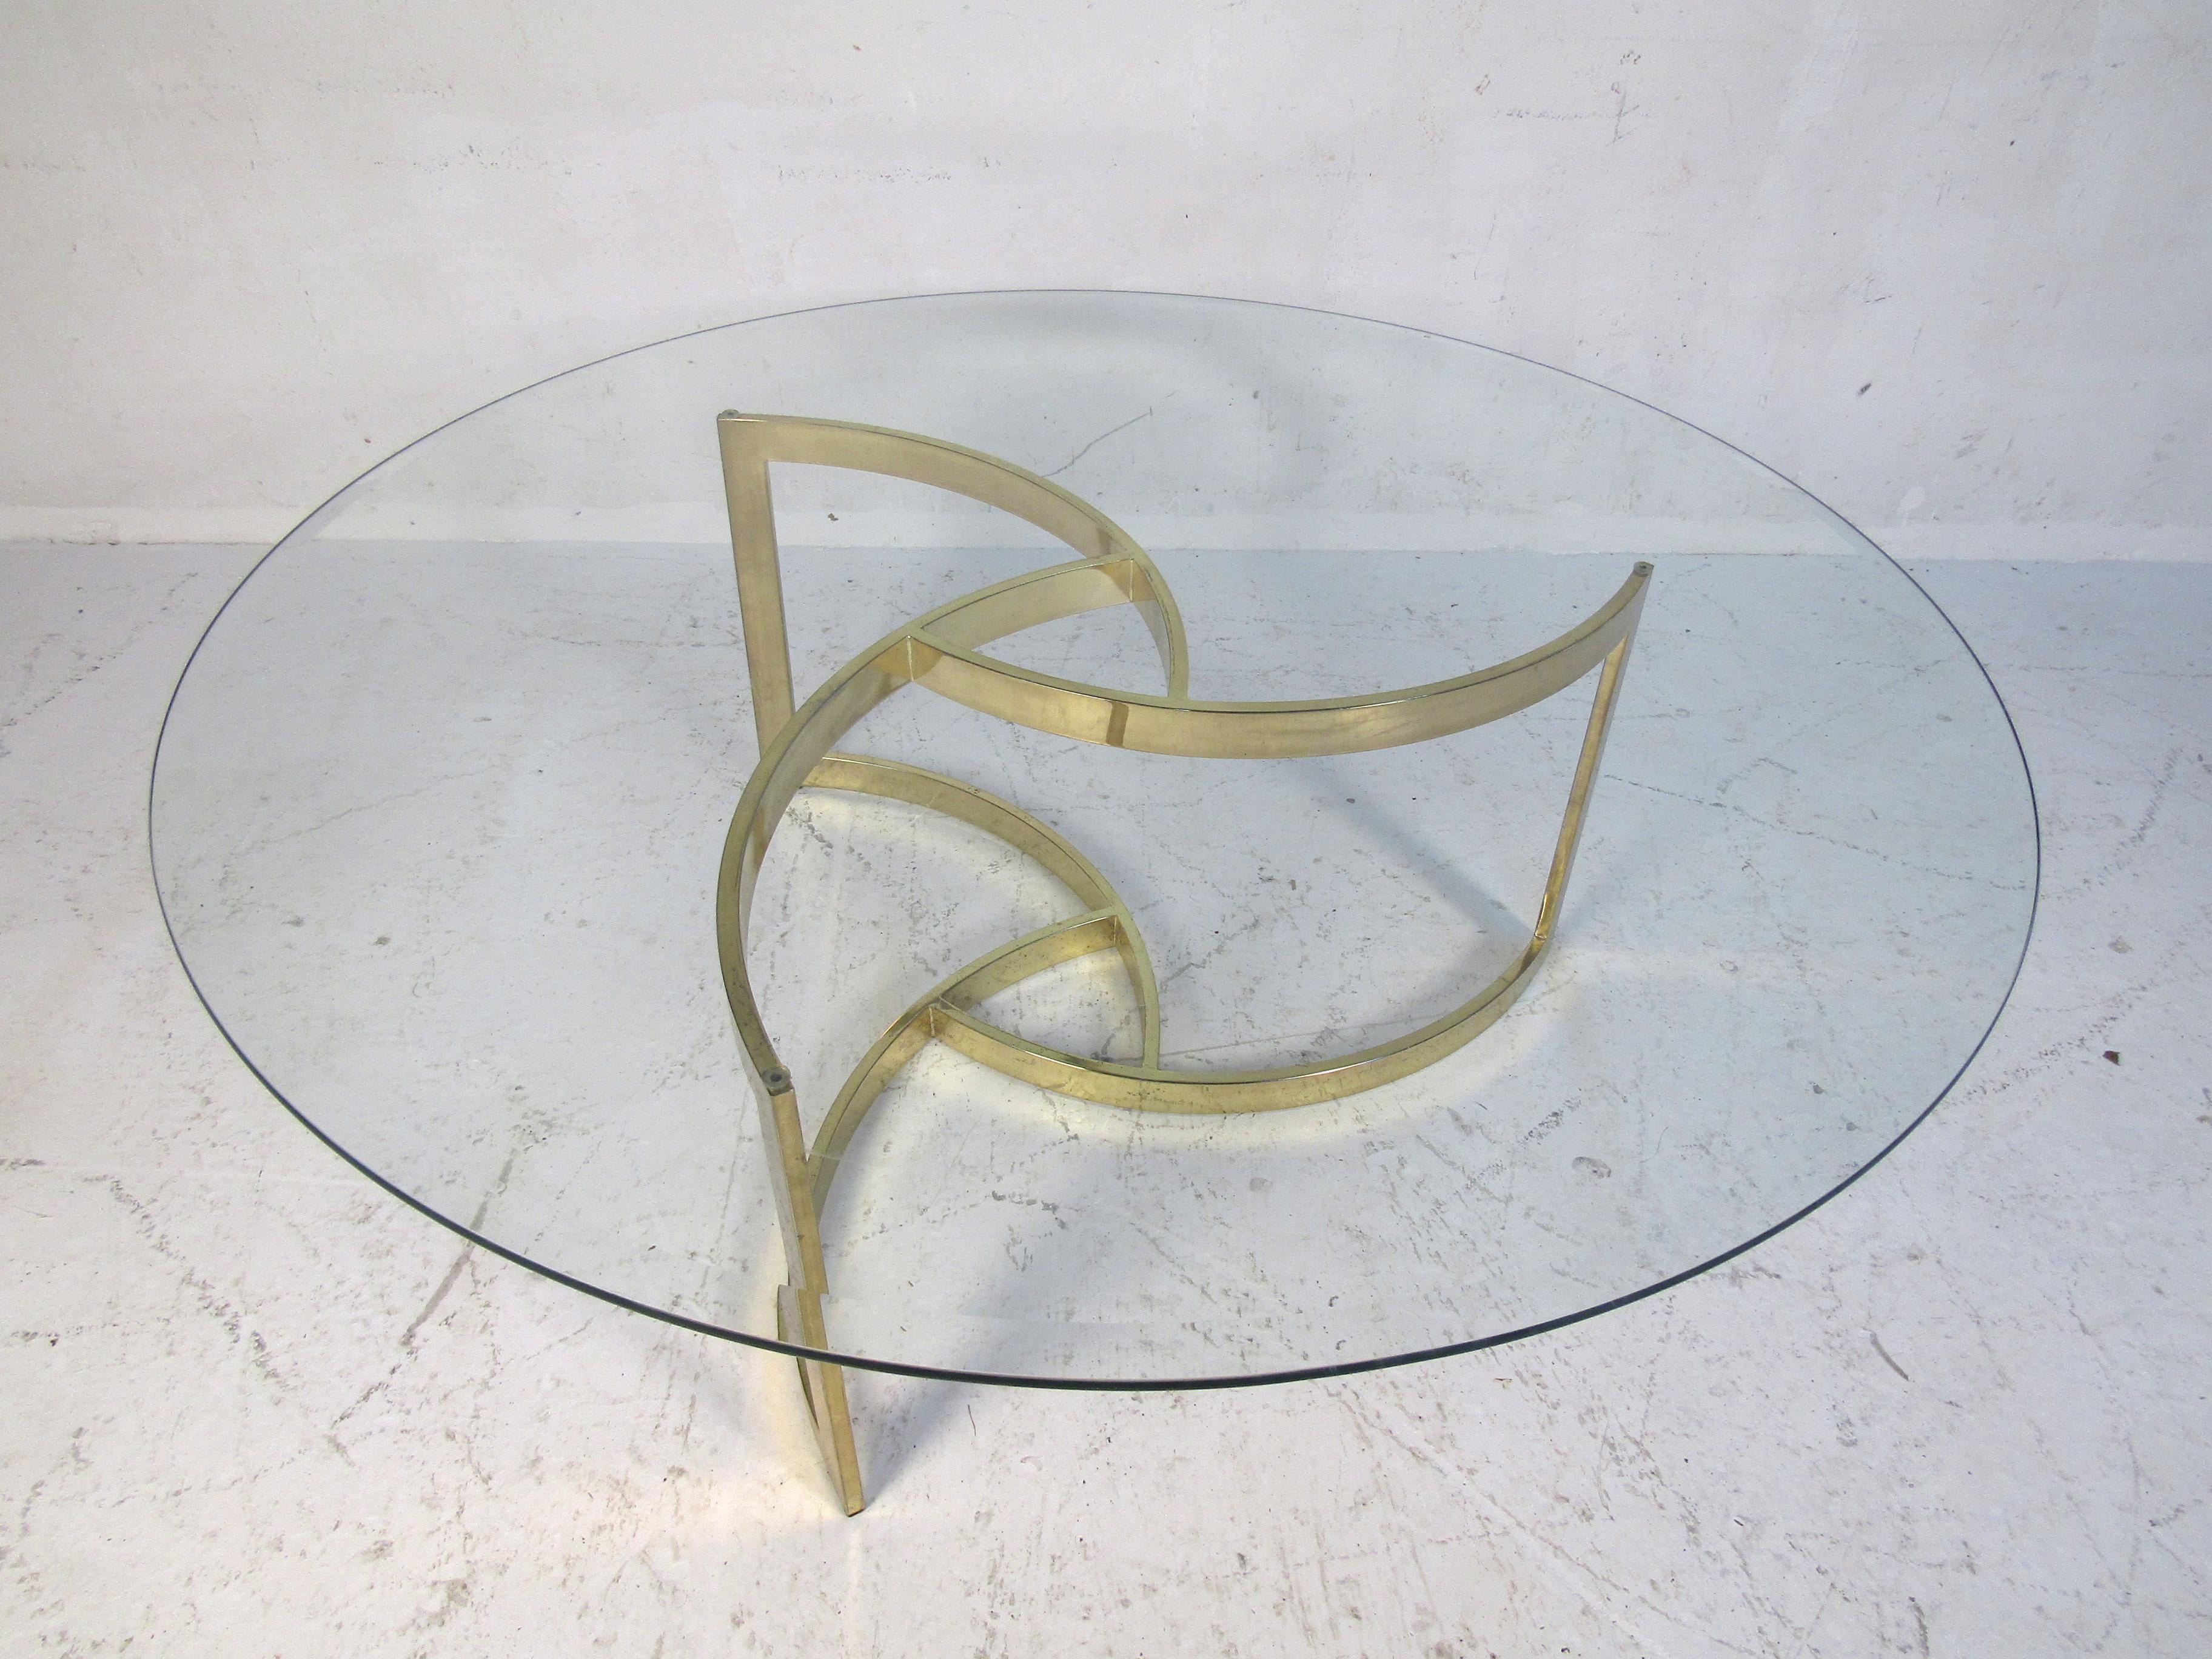 Sleek modern style table with round beveled glass top on a polished brass base.
(Please confirm item location - NY or NJ - with dealer).
 